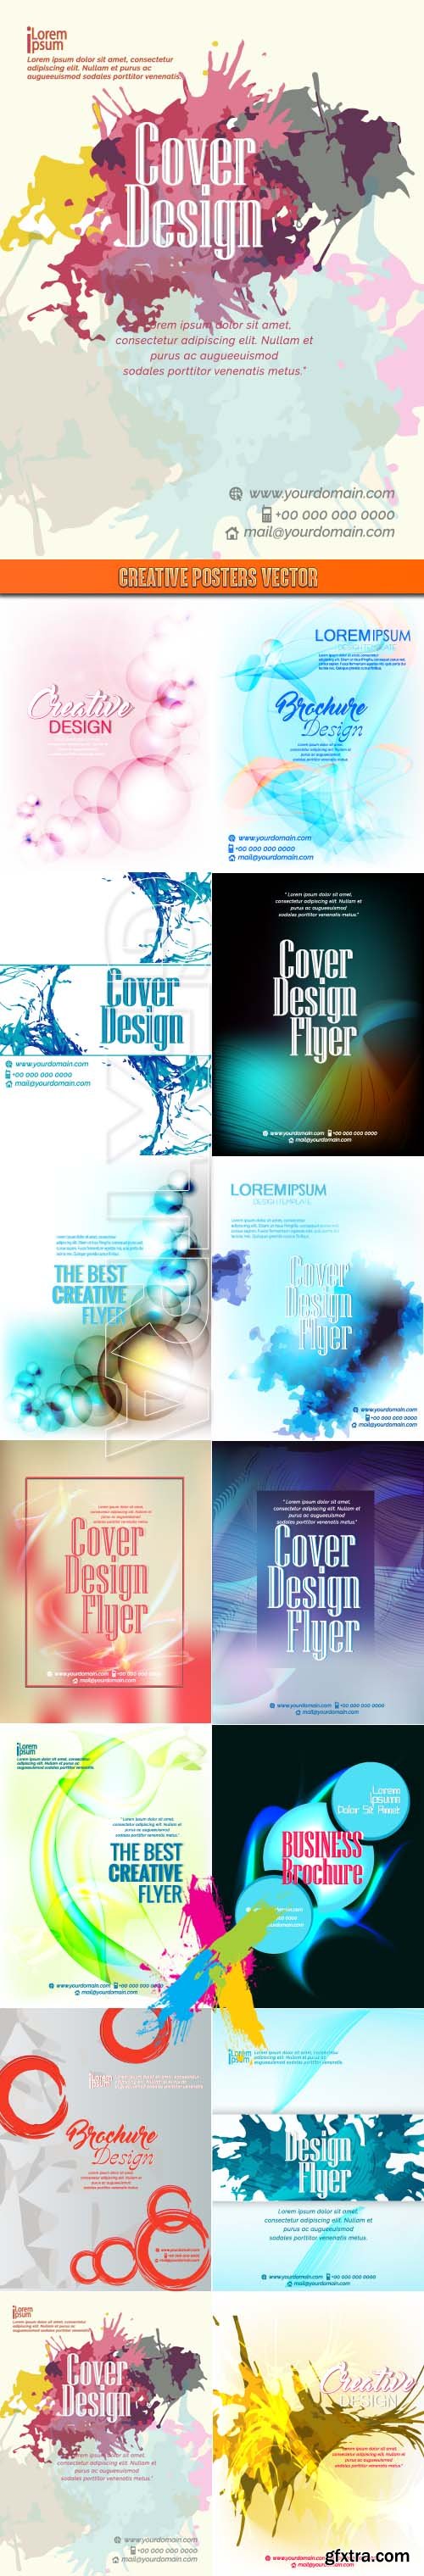 Creative posters vector